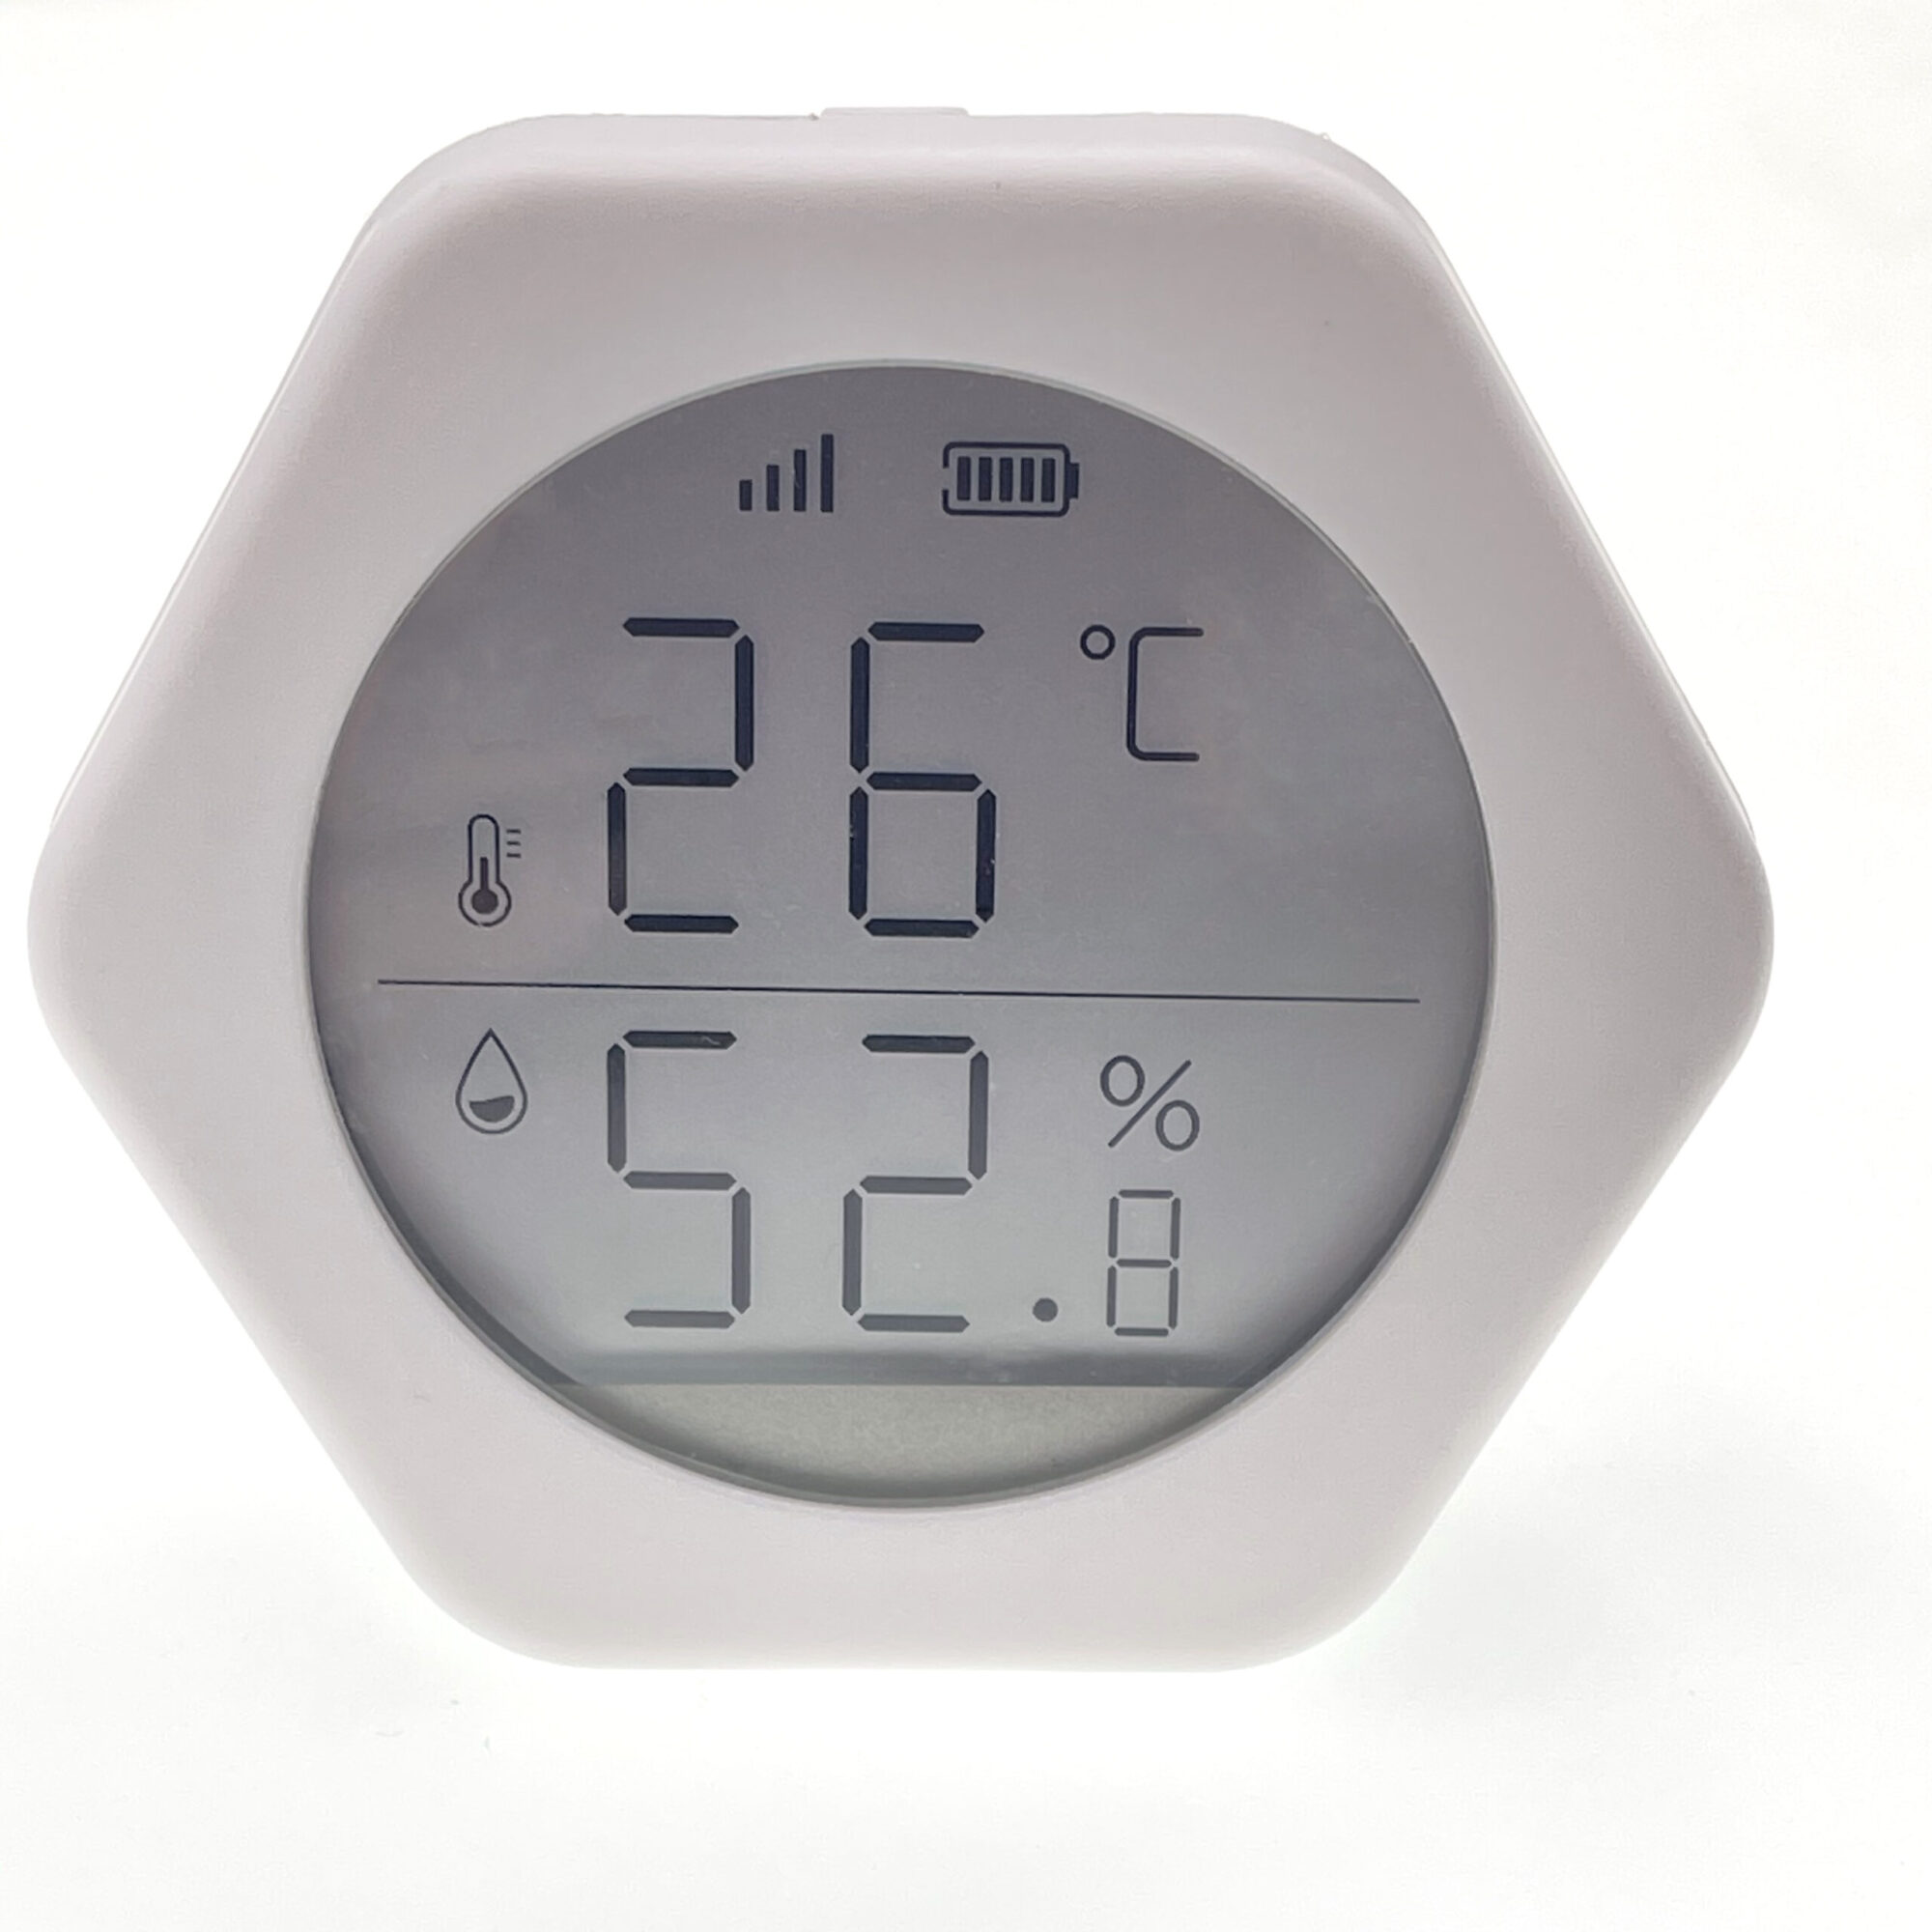 Temperature monitoring with a Bluetooth-enabled sensor. Patients